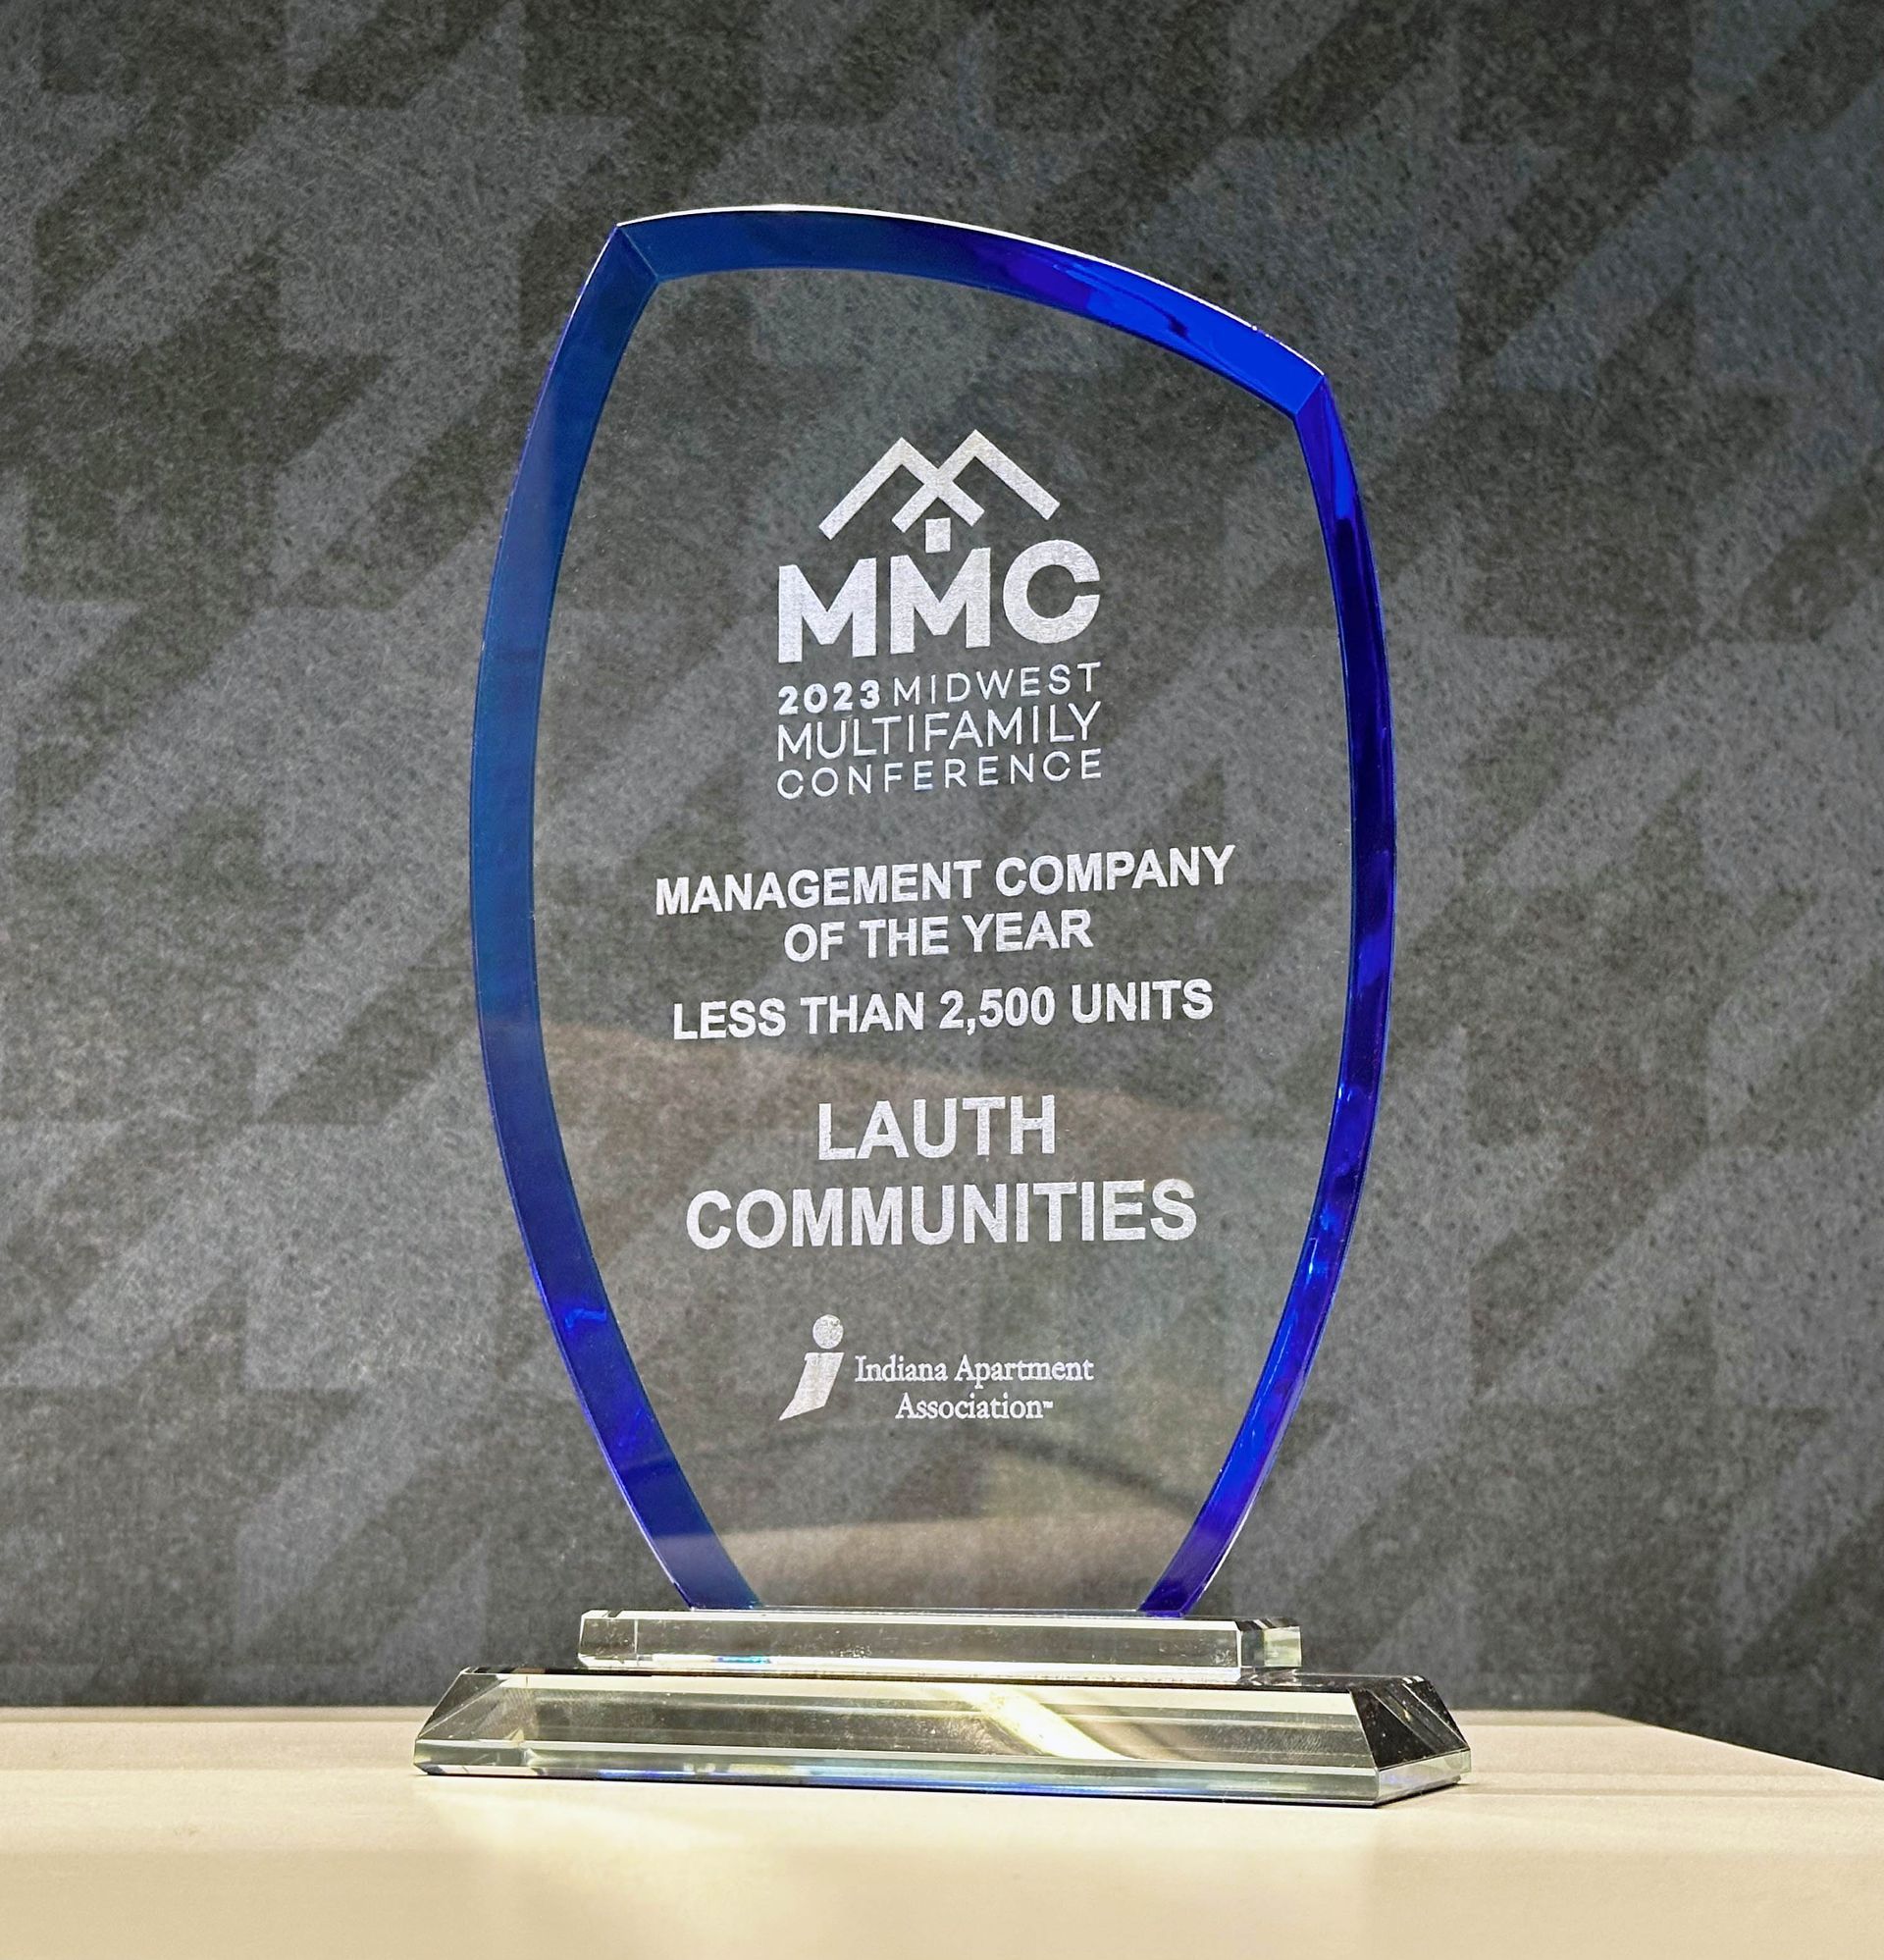 A mmc award for management company of the year